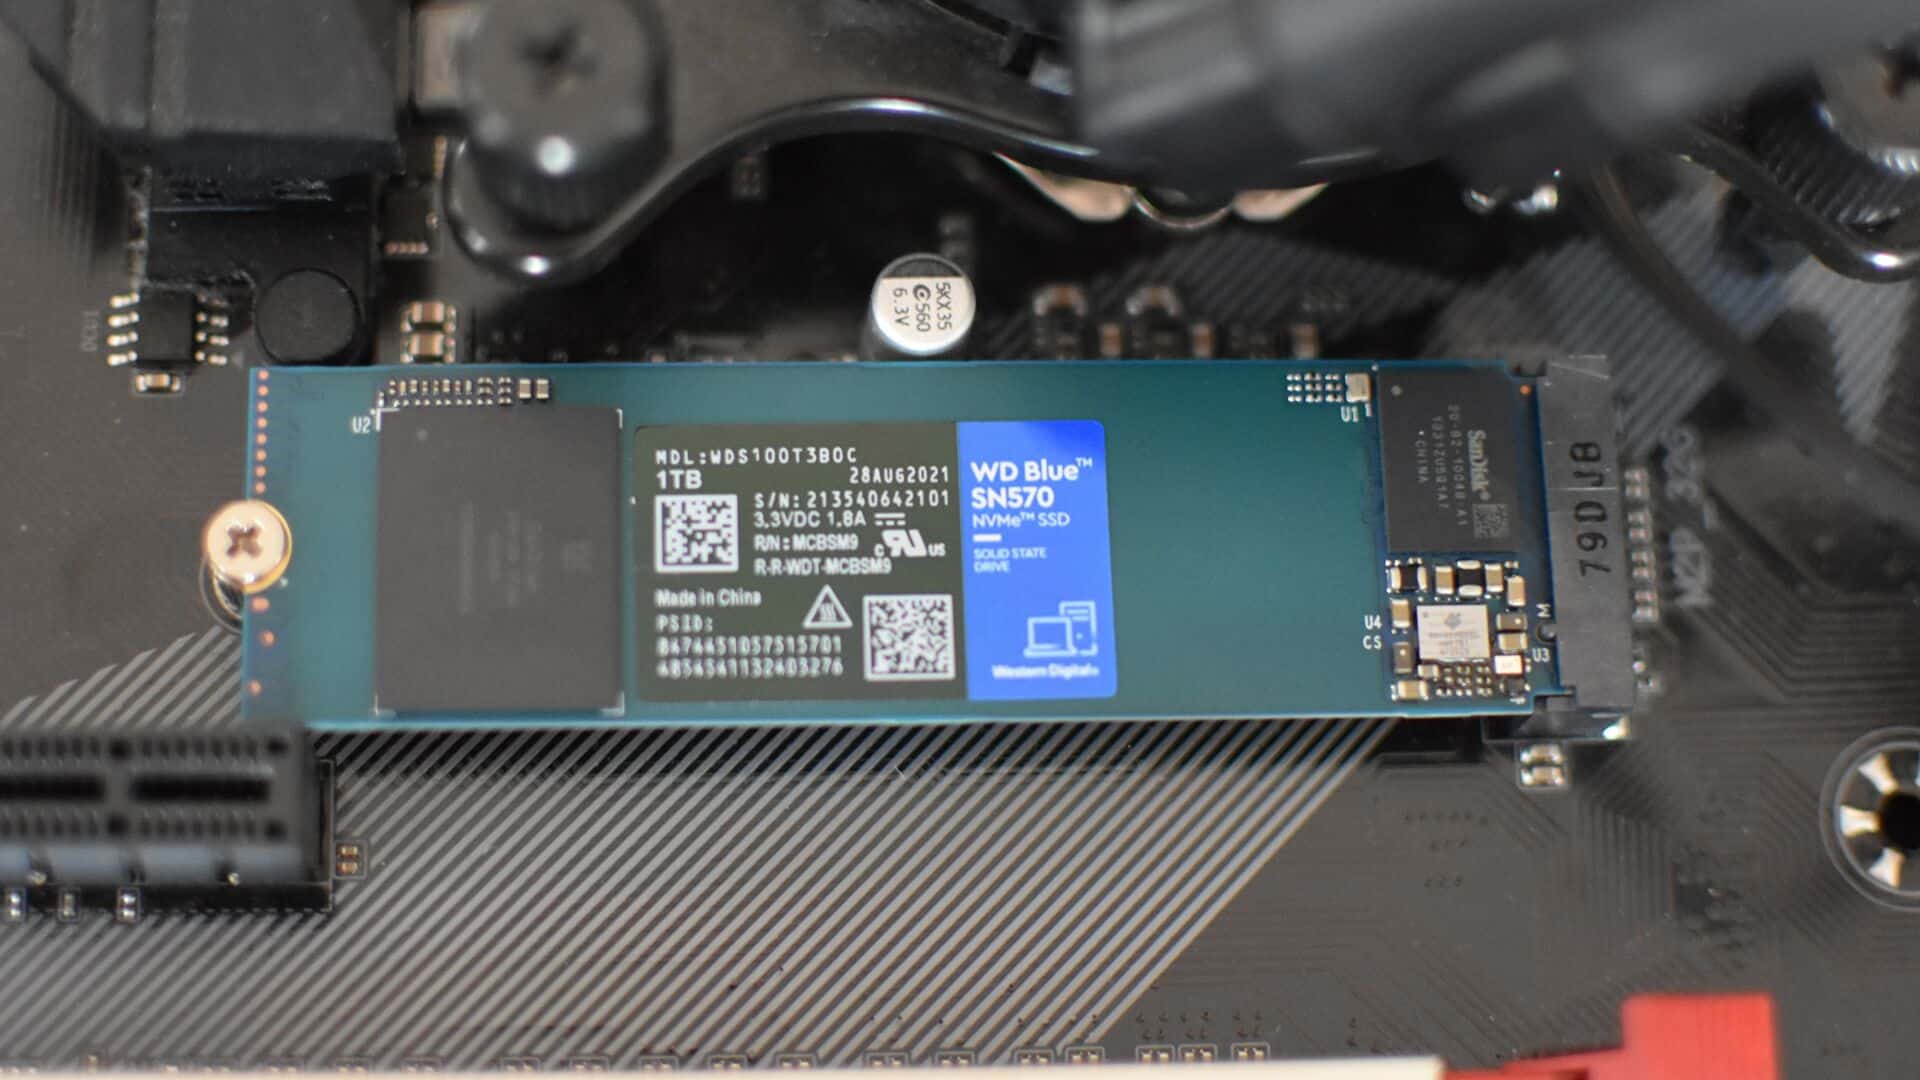 You can still get the excellent WD Blue SN570 SSD for cheap on Prime Day